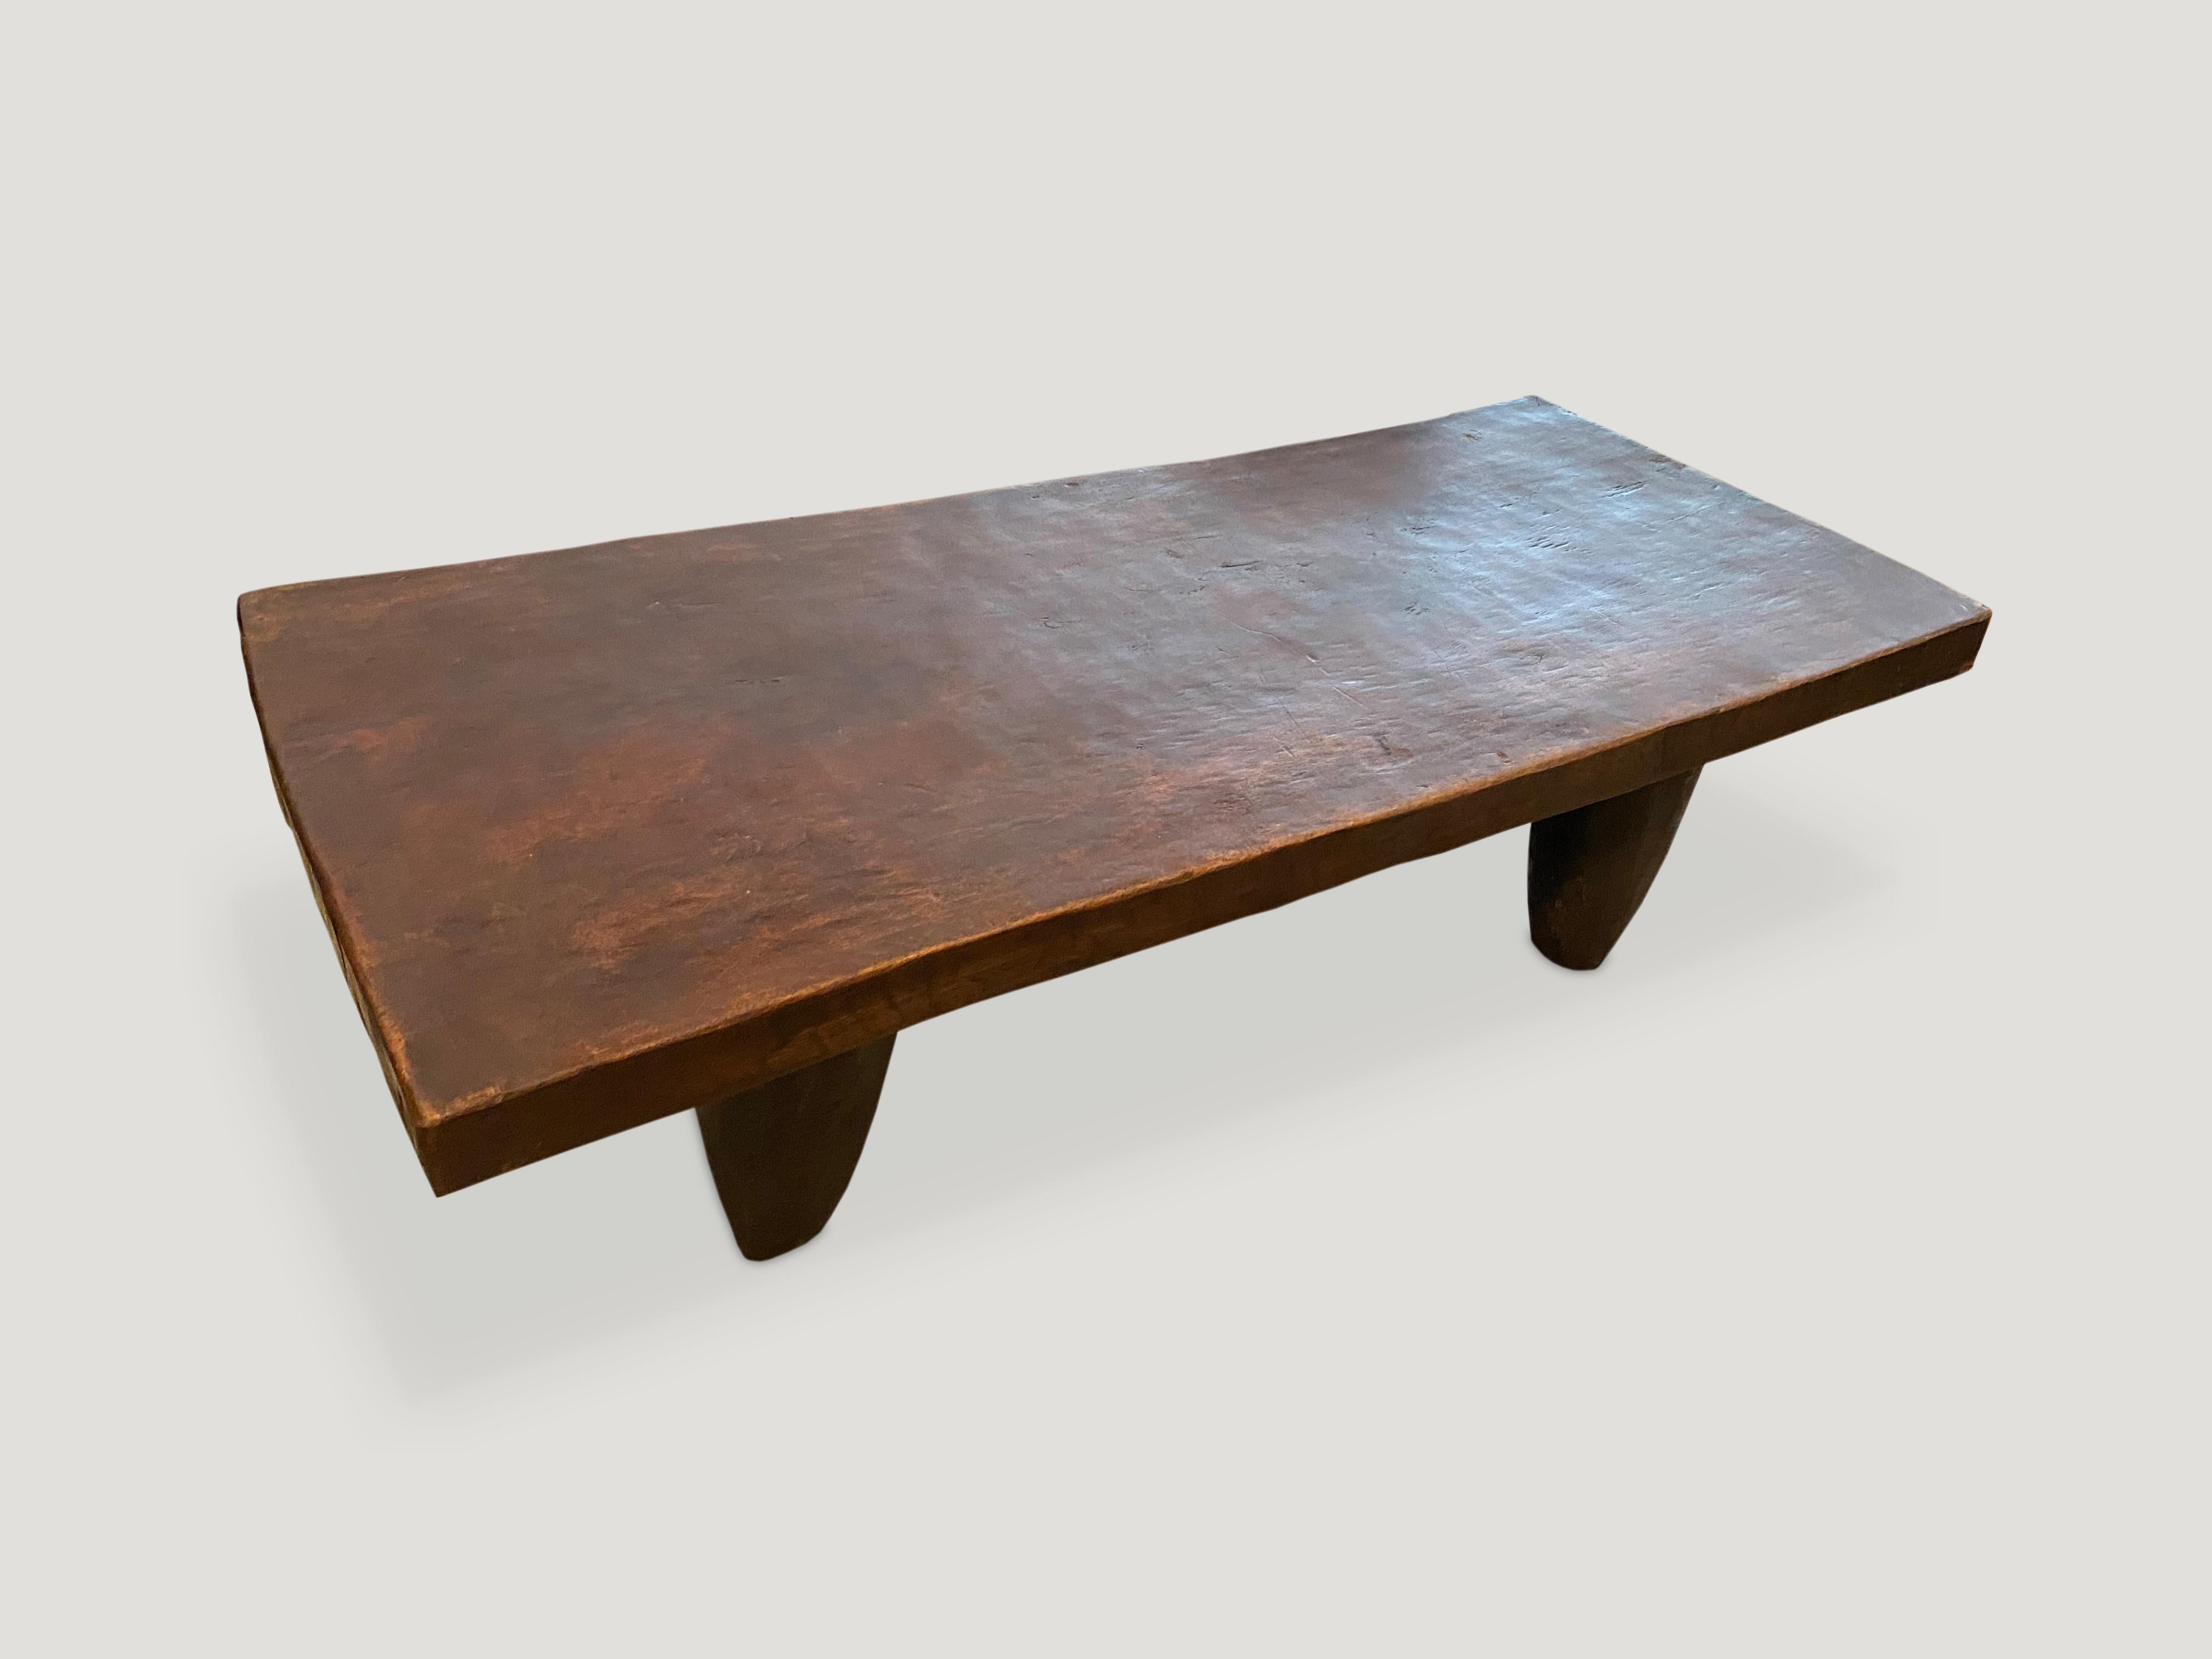 Antique coffee table or bench carved from a single piece of iroko wood, native to the west coast of Africa. The wood is tough, dense and very durable. A single two inch thick slab coffee table or bench with cone style legs.

This coffee table or